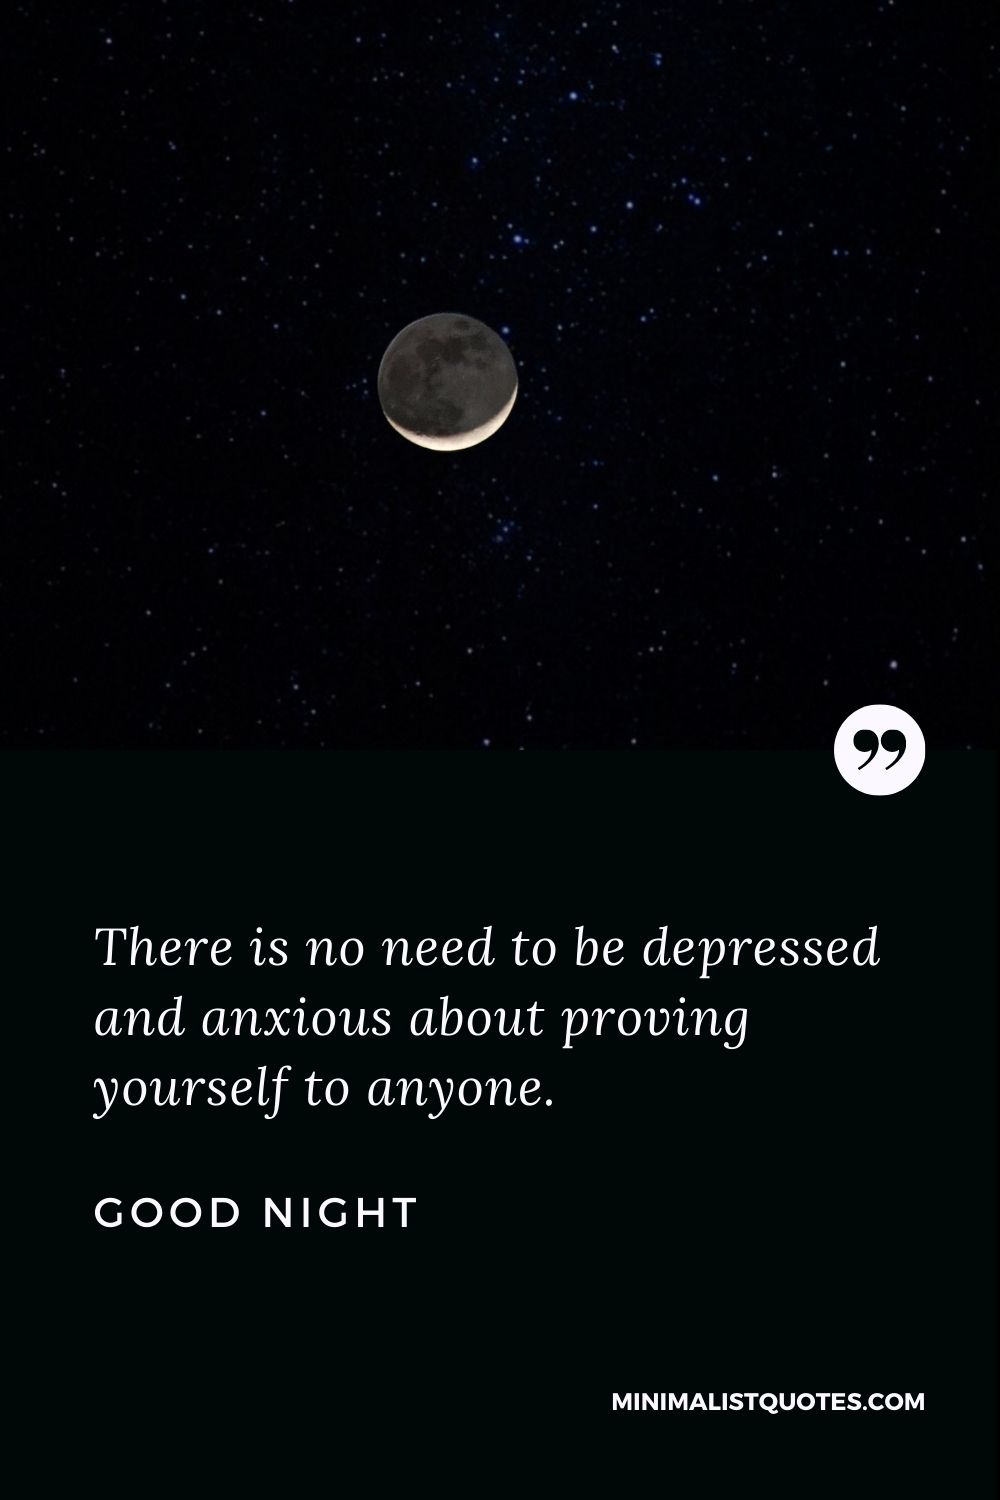 Good Night Wishes - There is no need to be depressed and anxious about proving yourself to anyone.